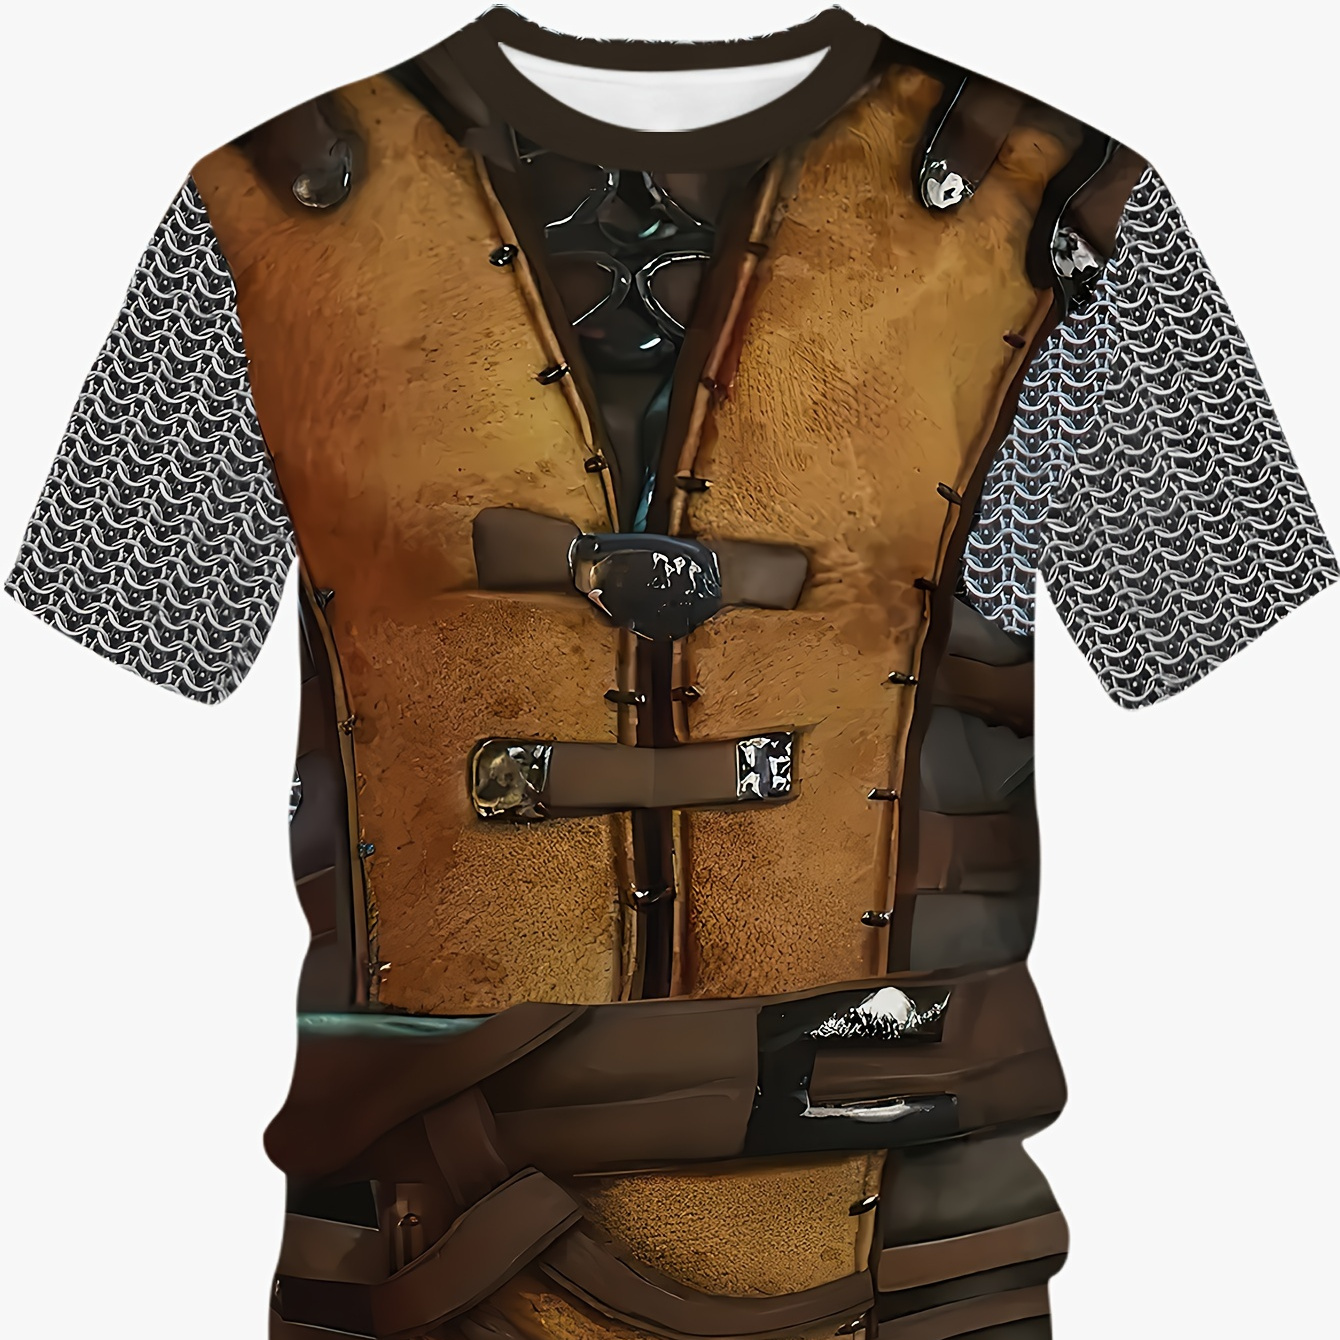 

Men's Novel And Stylish Medieval Suit Vest Like Pattern Print T-shirt With Crew Neck And Short Sleeve, Perfect Tops For Summer Outdoors Activities